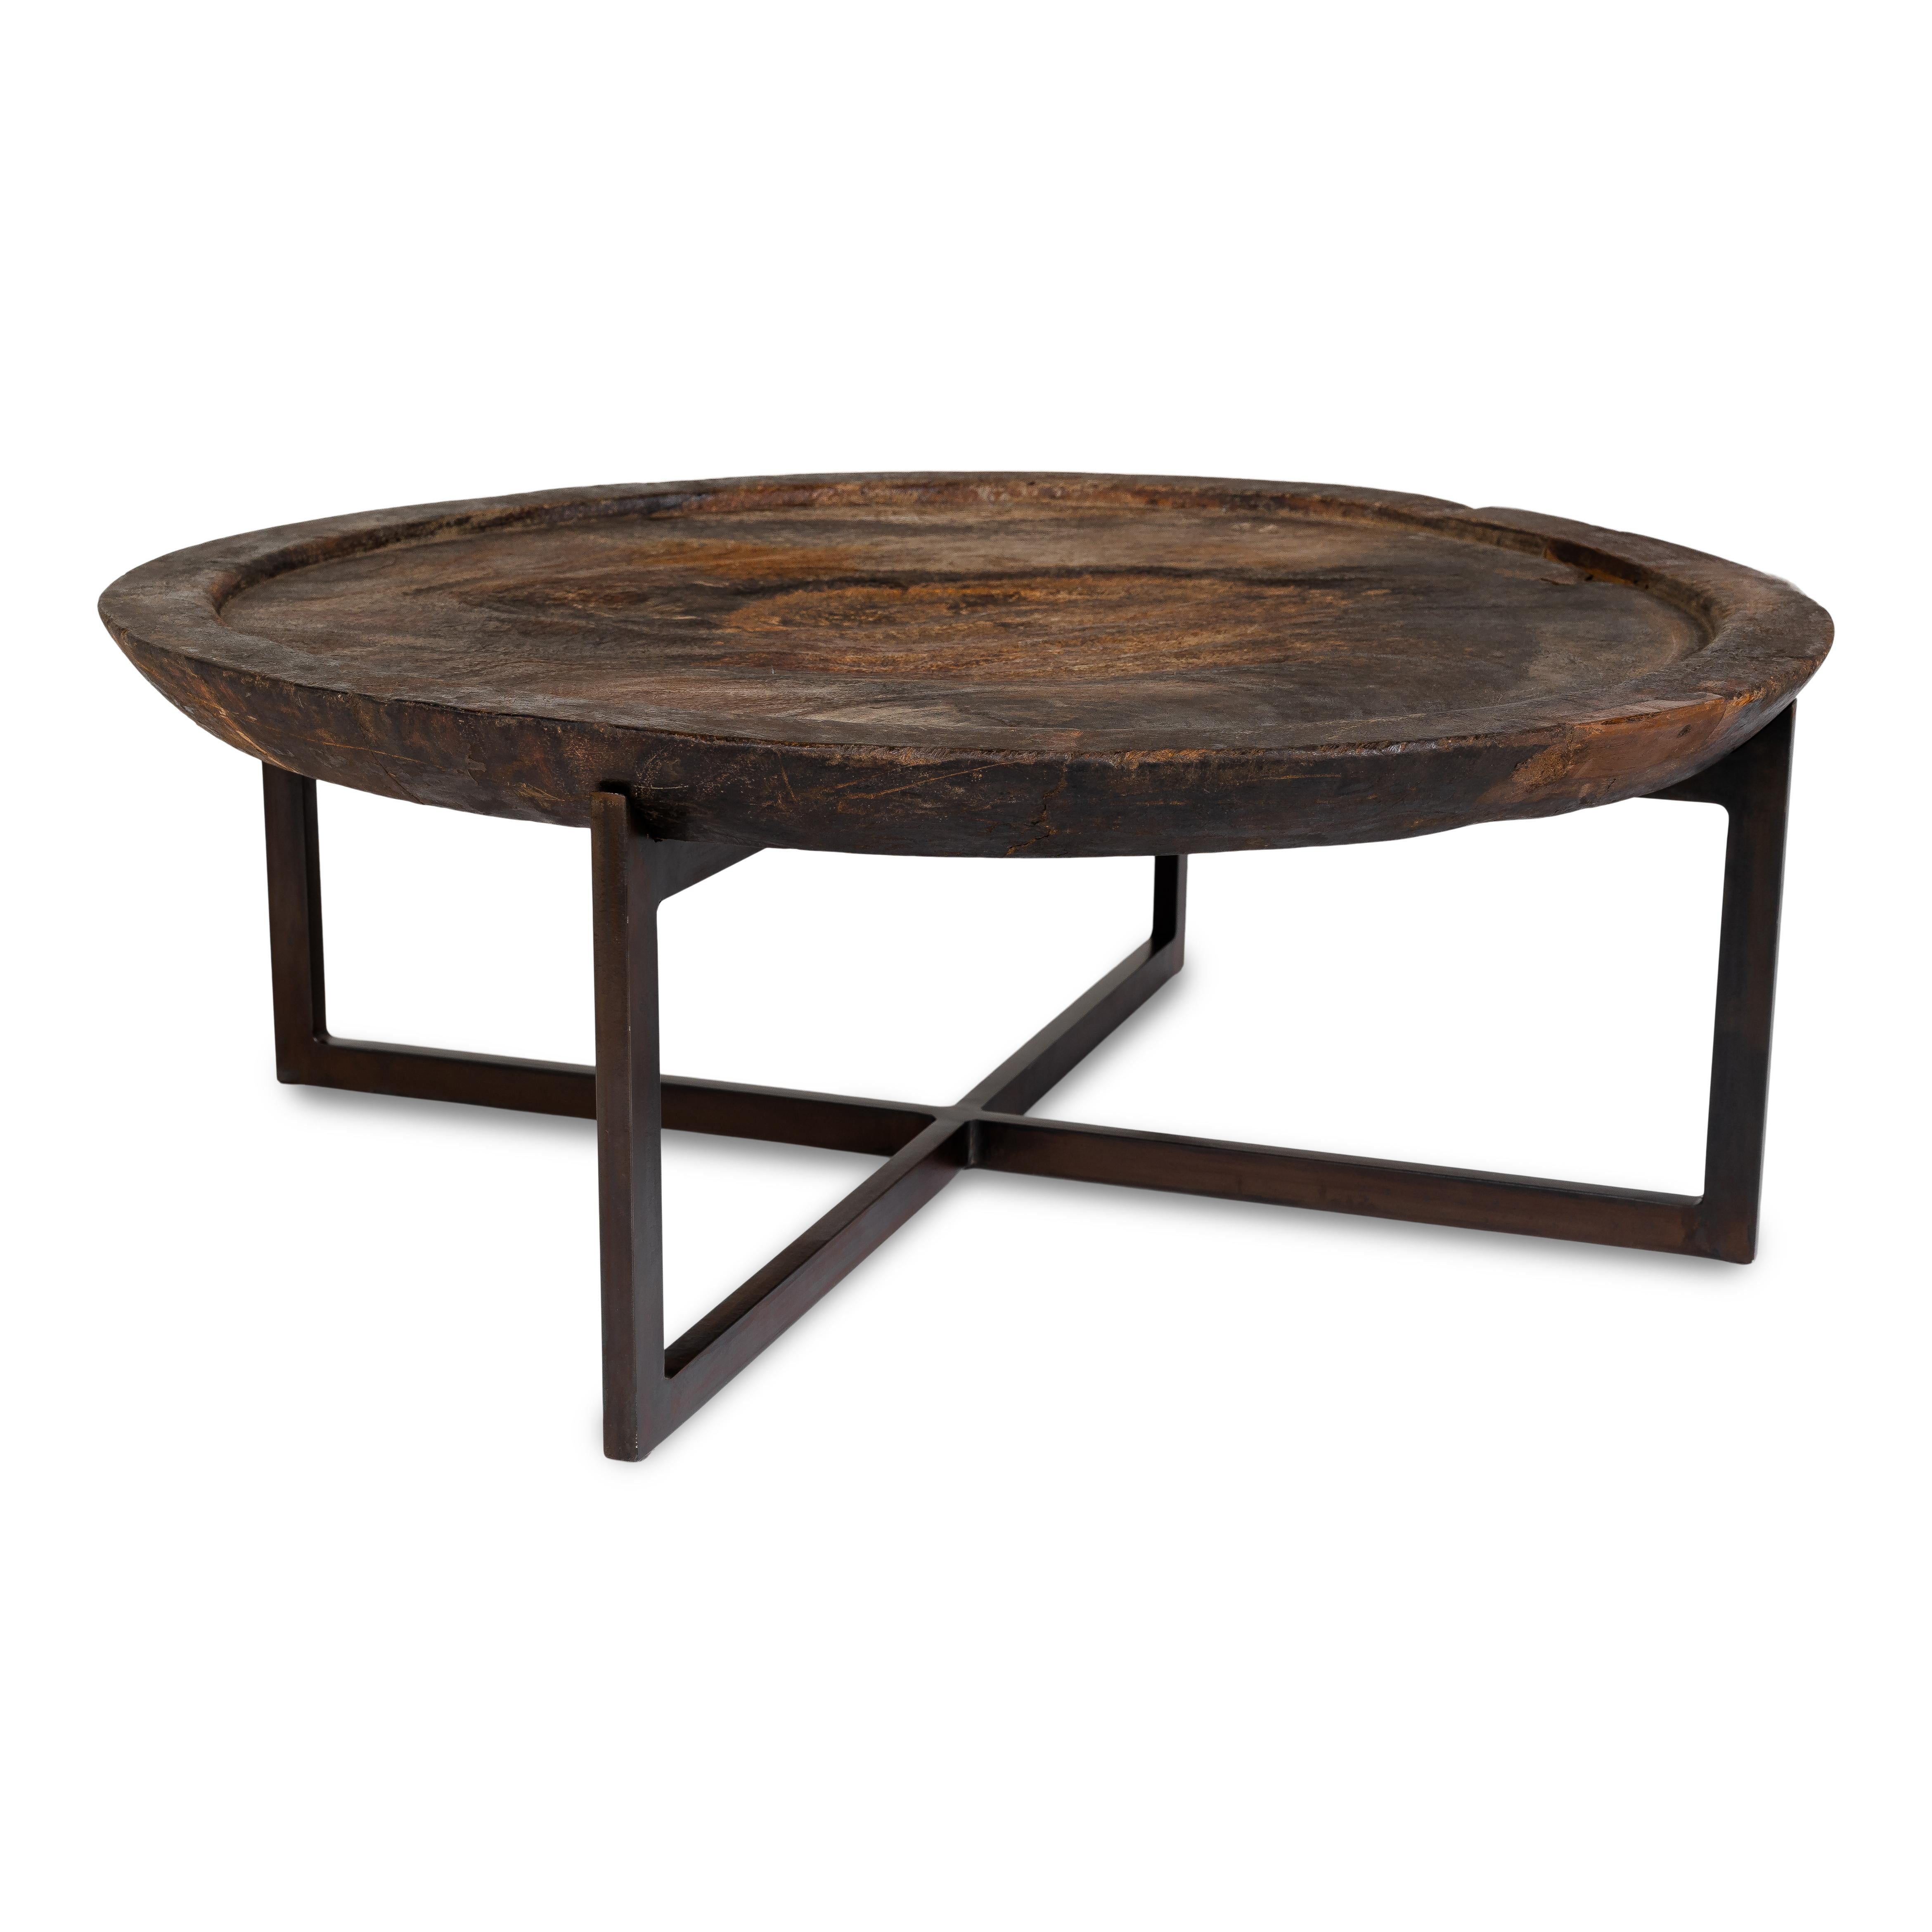 Vintage teak south Asian serving bowl on patinaed steel stand

This piece is a part of Brendan Bass’s one-of-a-kind collection, Le Monde. French for “The World”, the Le Monde collection is made up of rare and hard to find pieces curated by Brendan